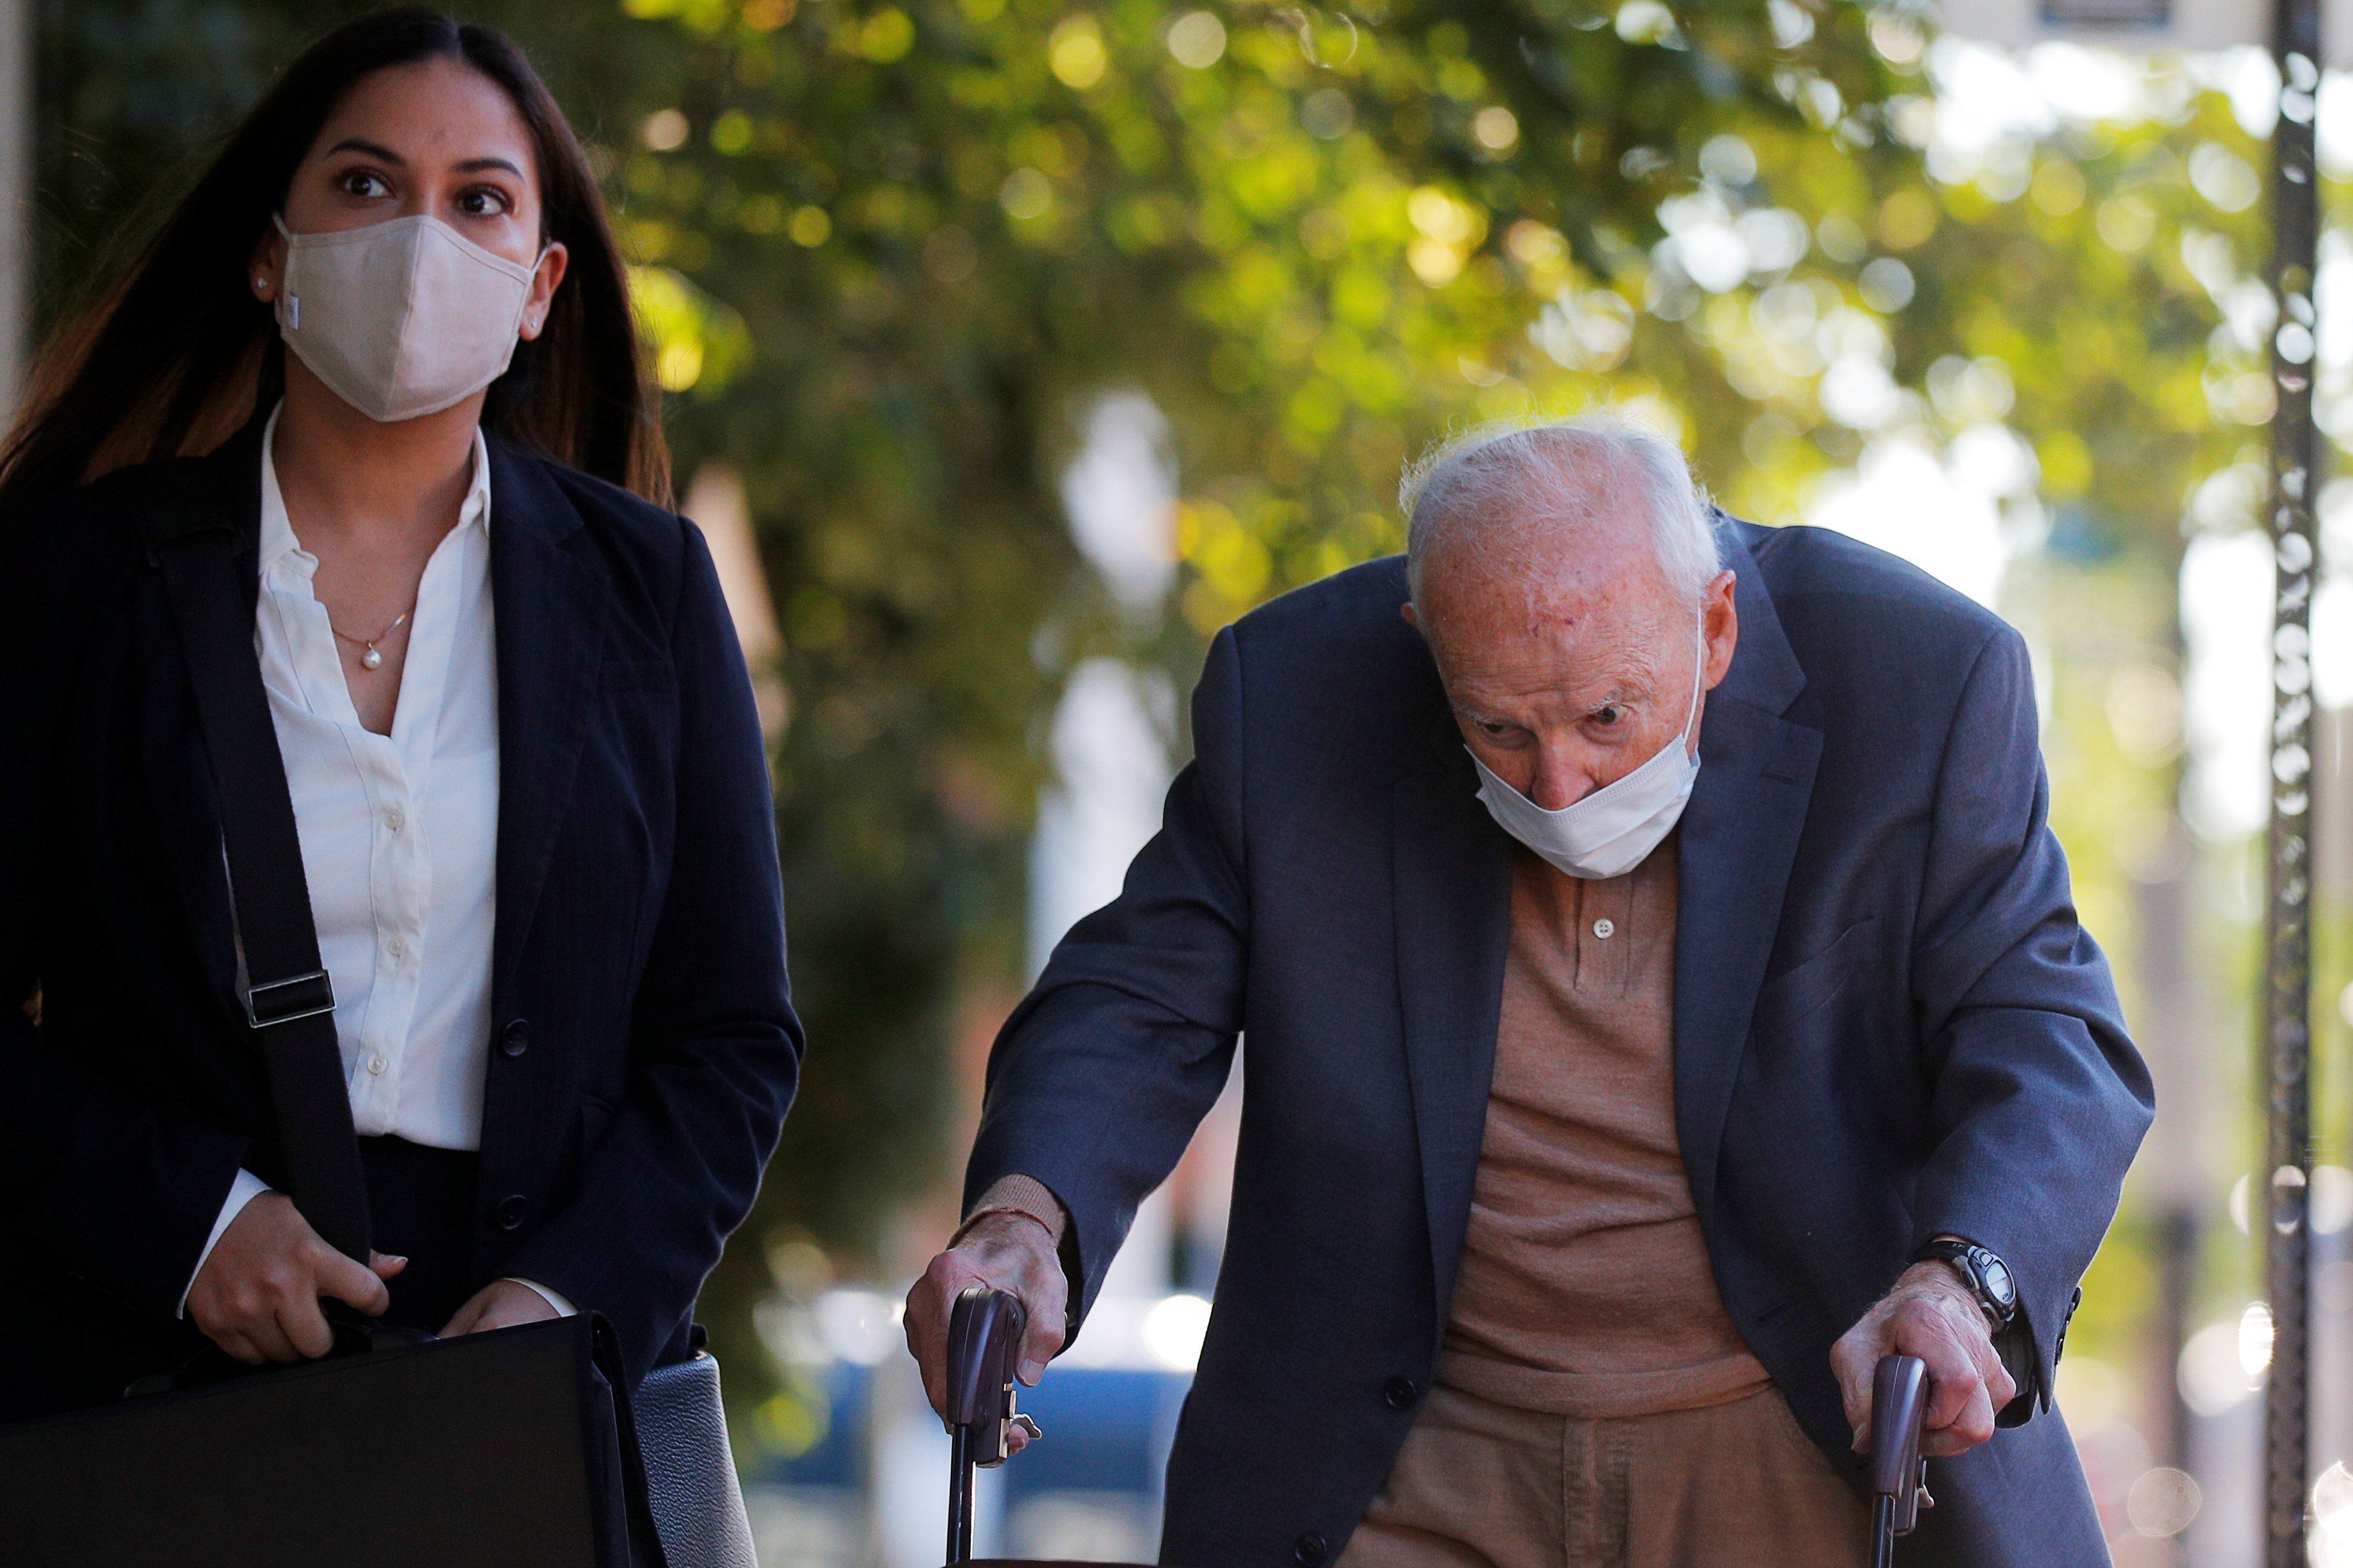 Former Cardinal Theodore E. McCarrick arrives at Dedham District Court in Dedham, Mass., Sept. 3, 2021, after being charged with molesting a 16-year-old boy during a 1974 wedding reception.  (CNS photo/Brian Snyder, Reuters)